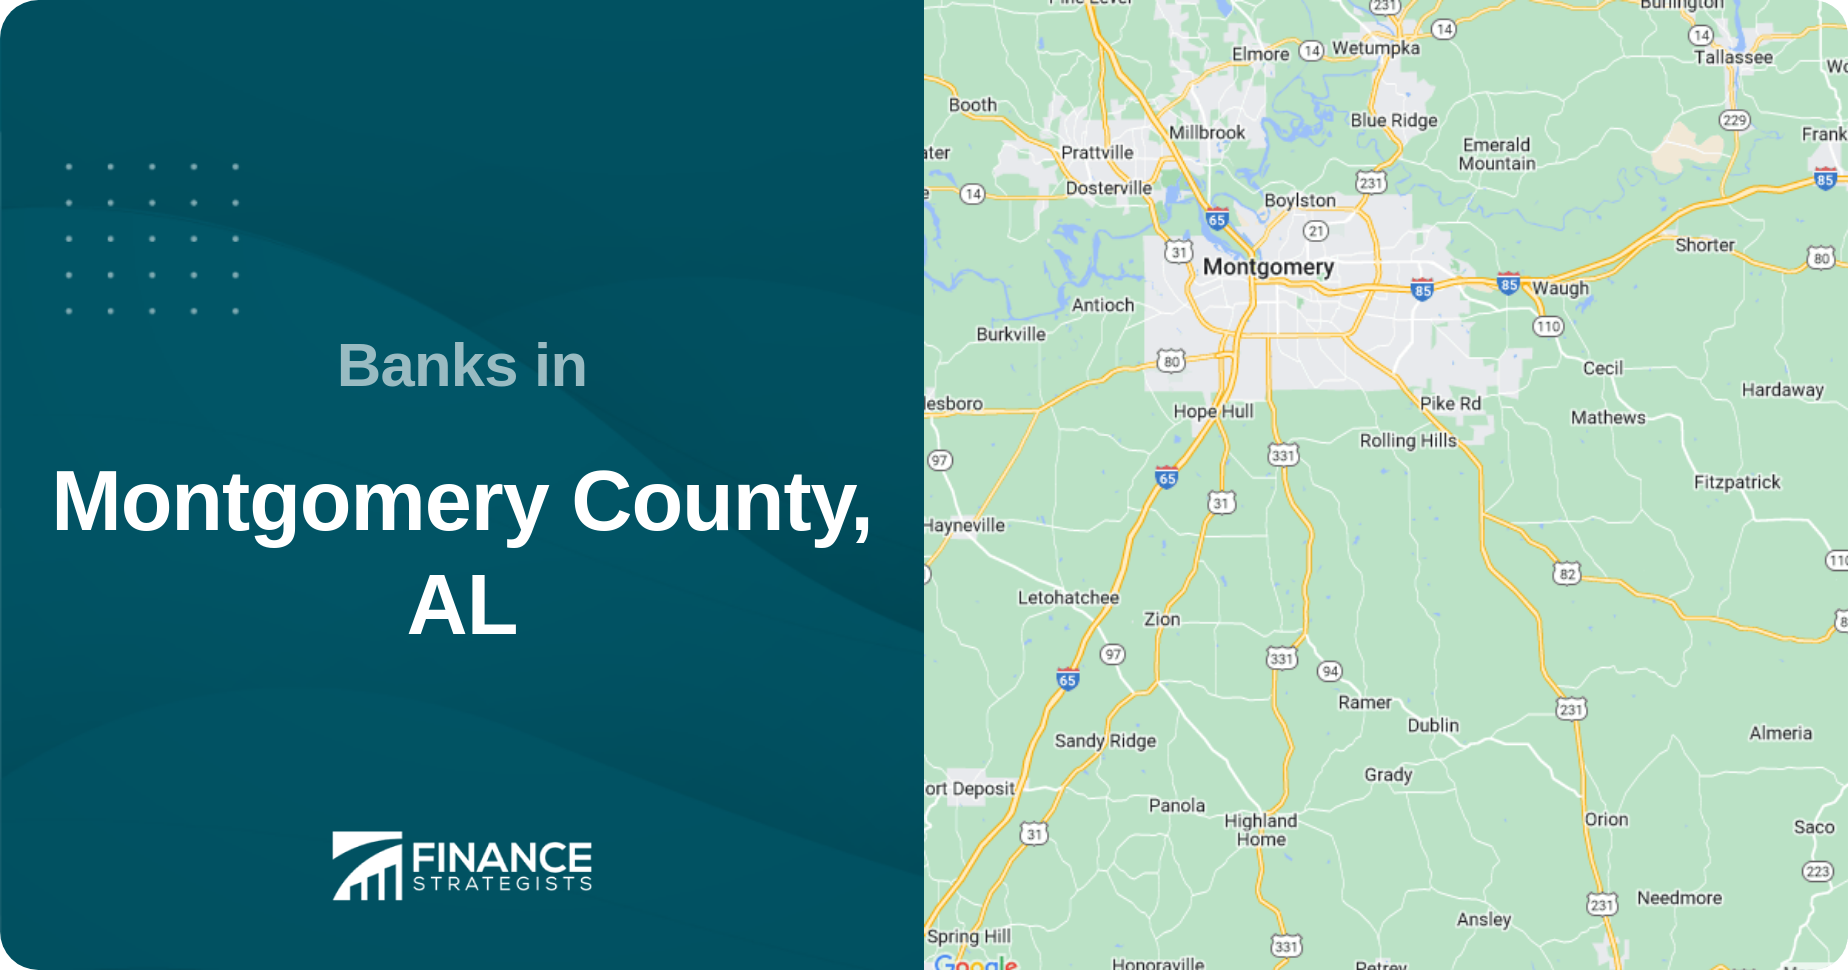 Banks in Montgomery County, AL